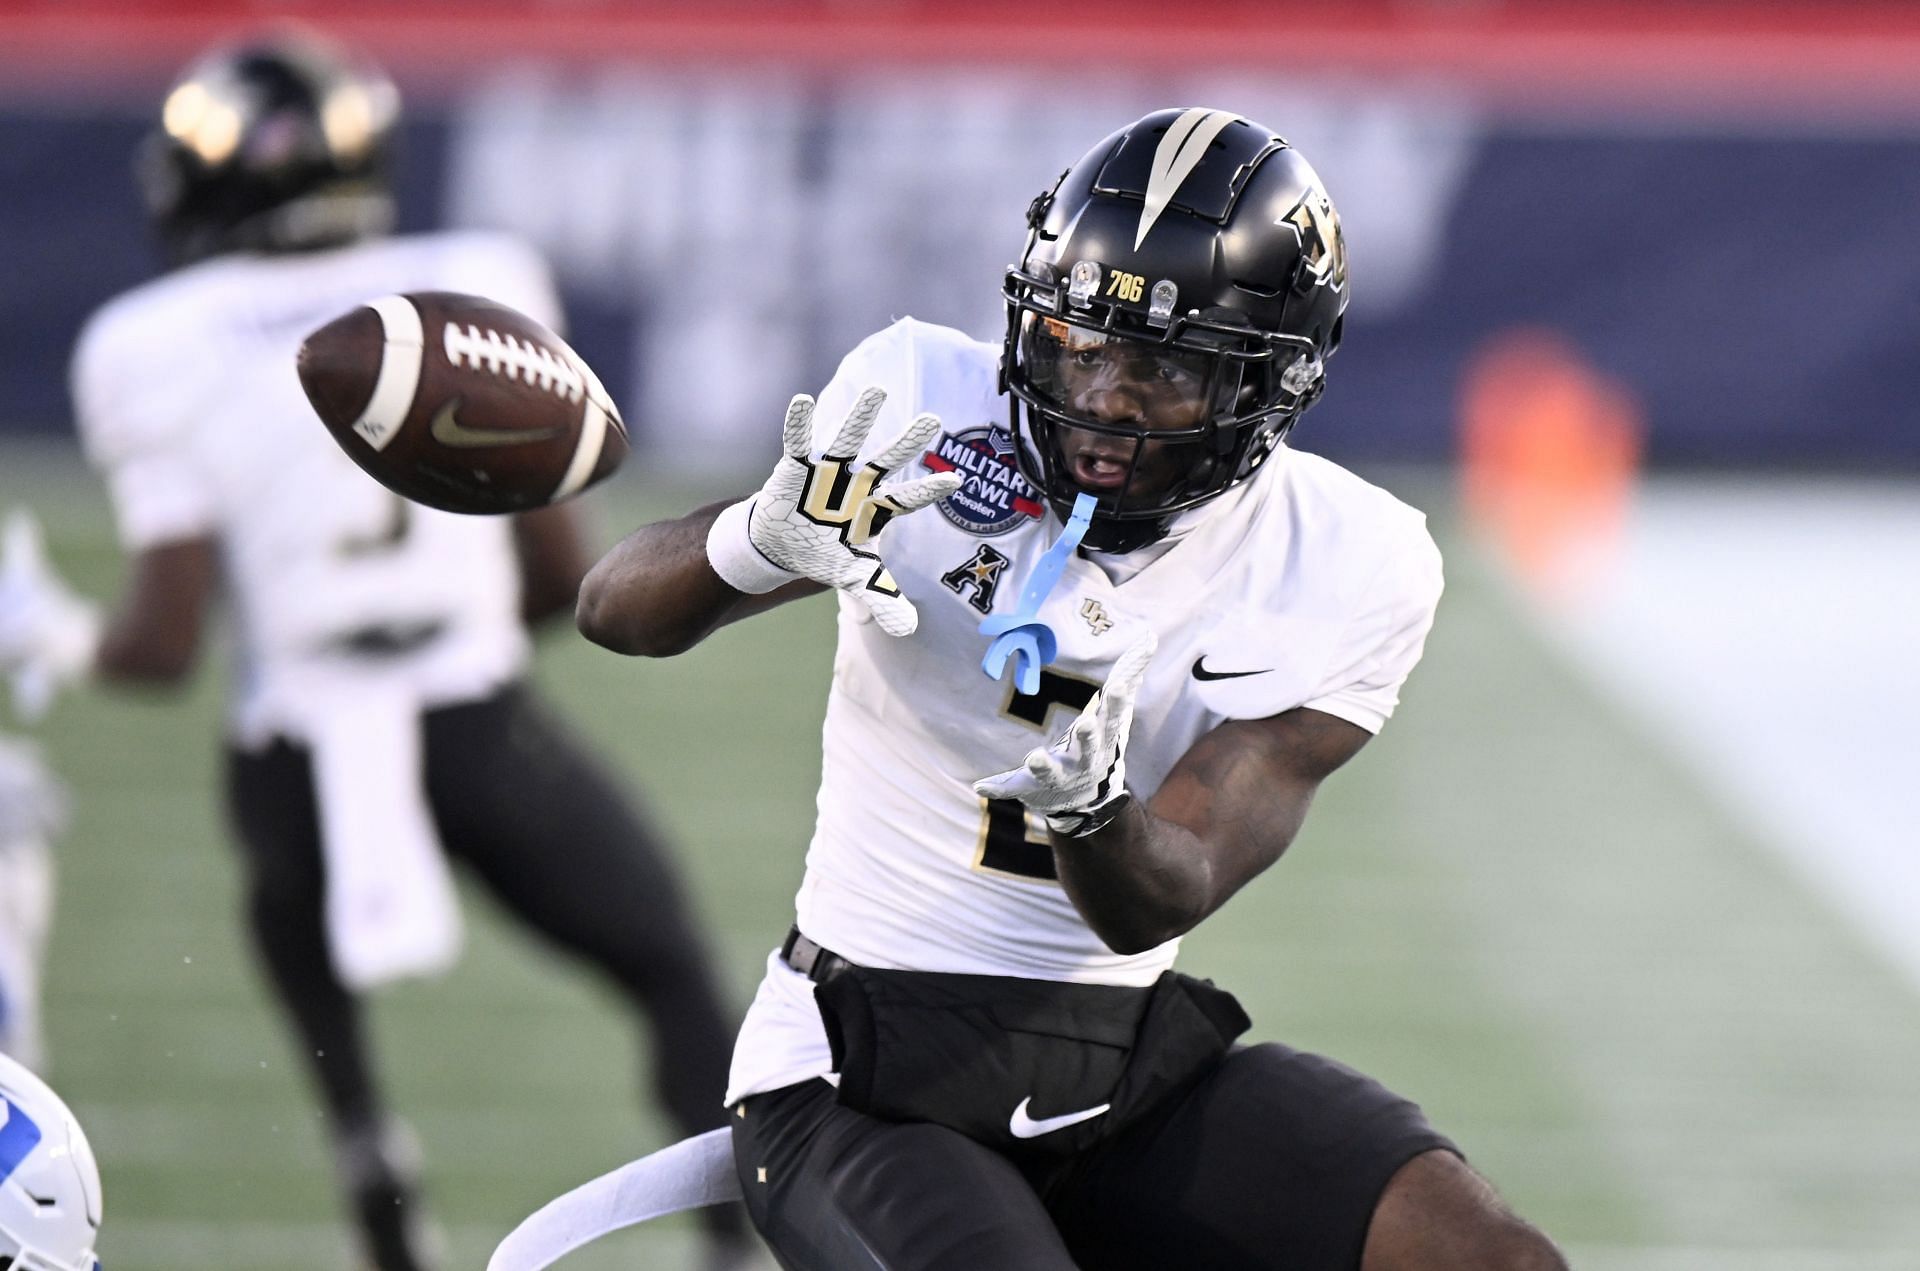 UCF football schedule 2023 Full season matchups, tickets, and